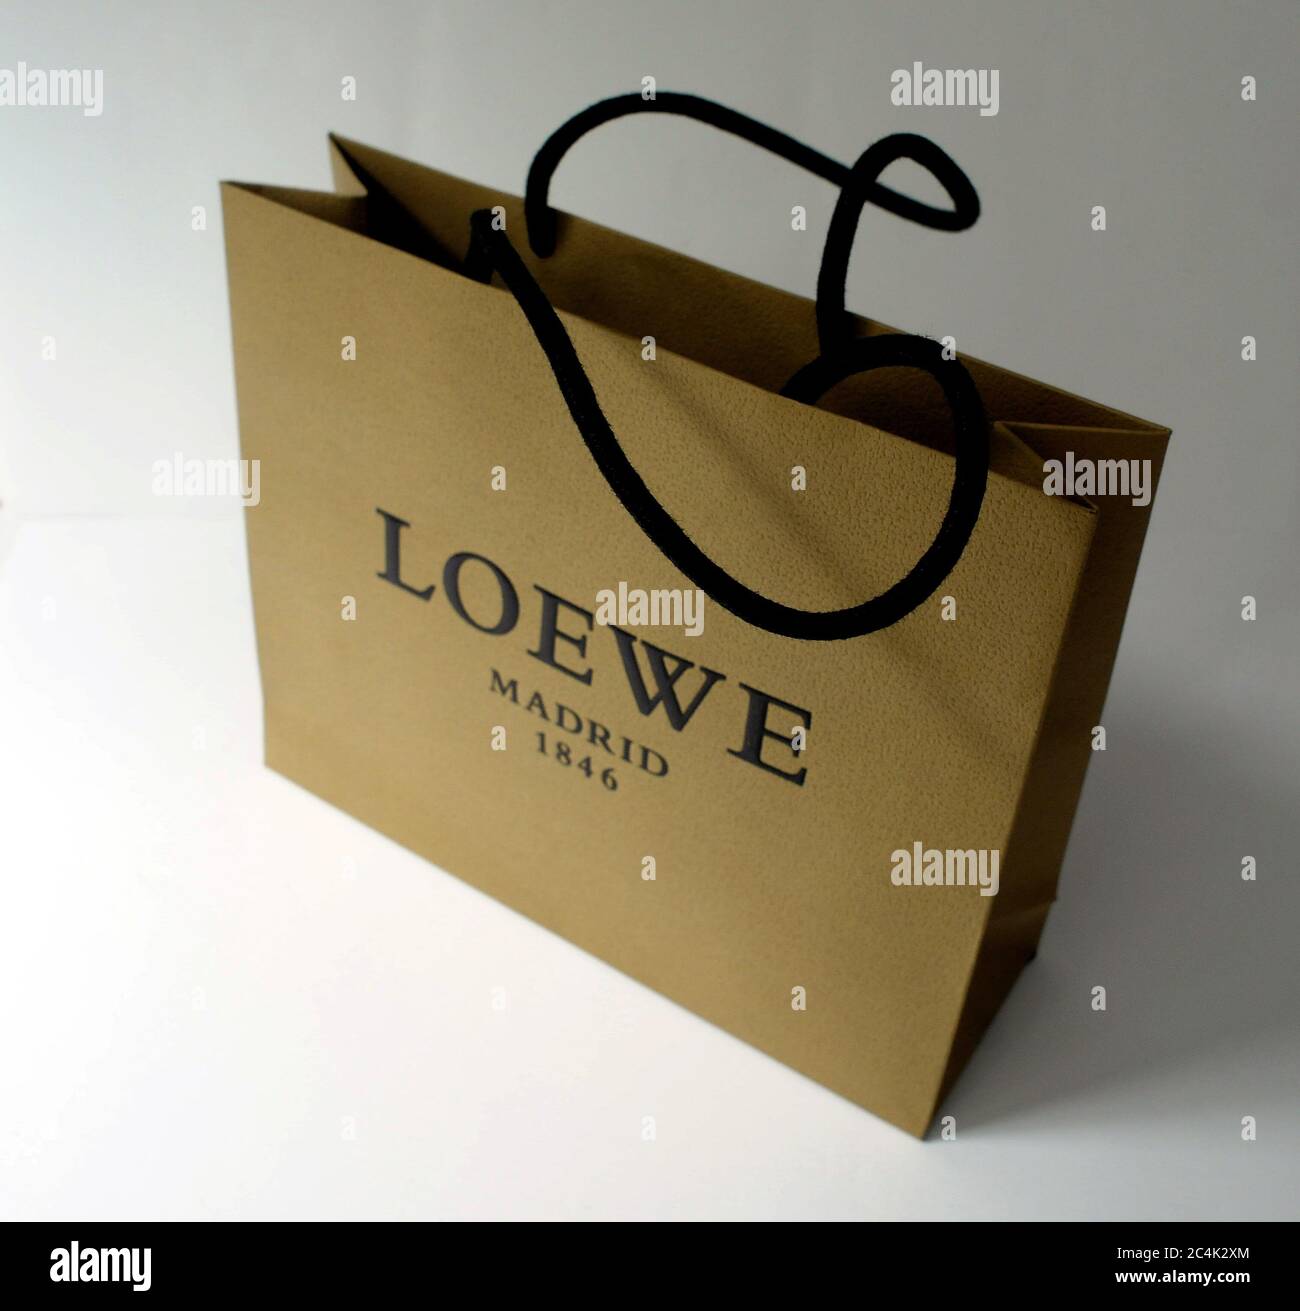 LOEWE paper bag. Design. Founded in 